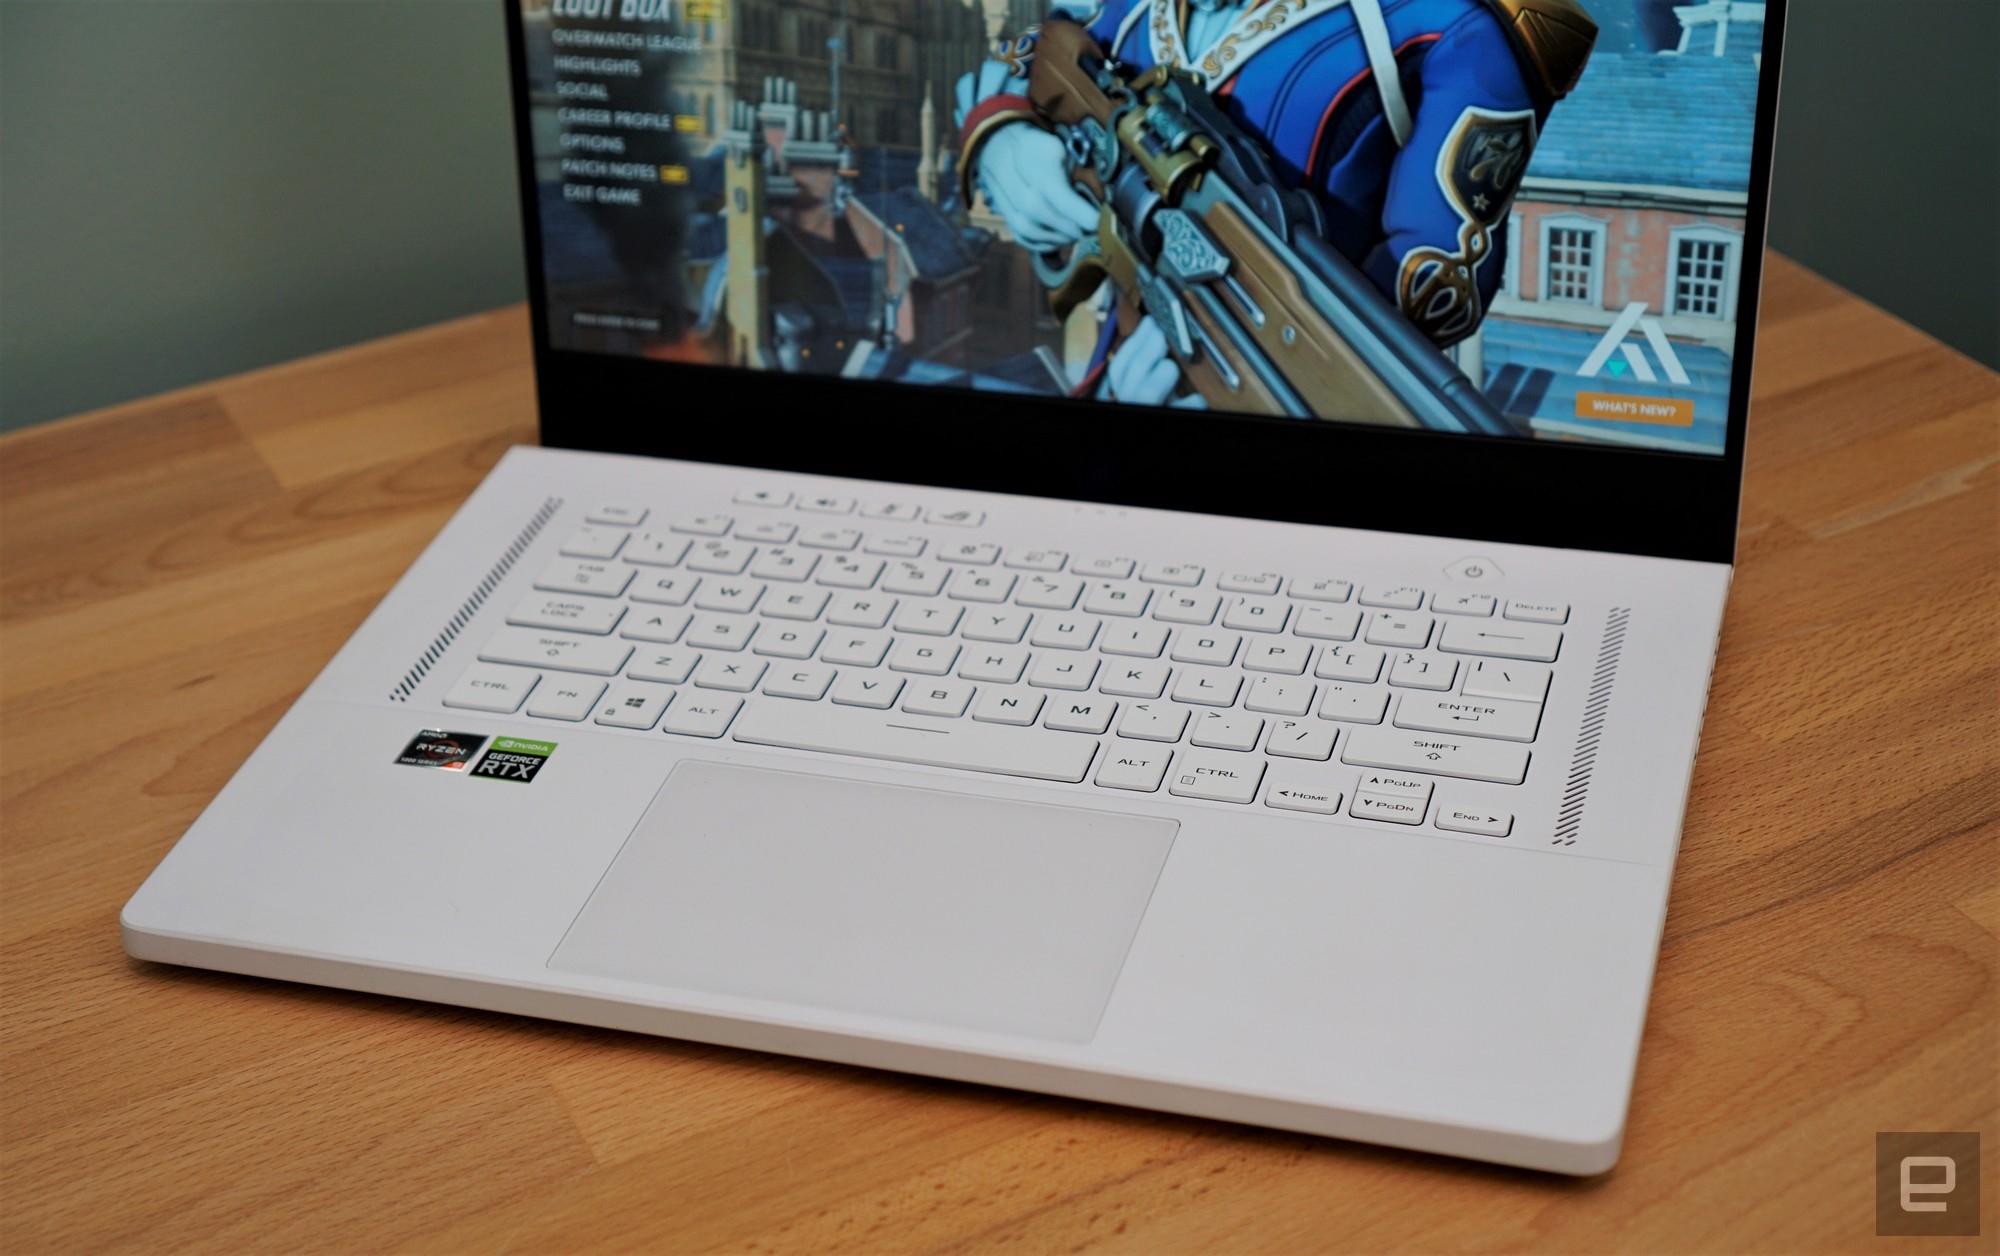 ASUS Zephyrus G15 review (2021): All the gaming laptop you need | DeviceDaily.com